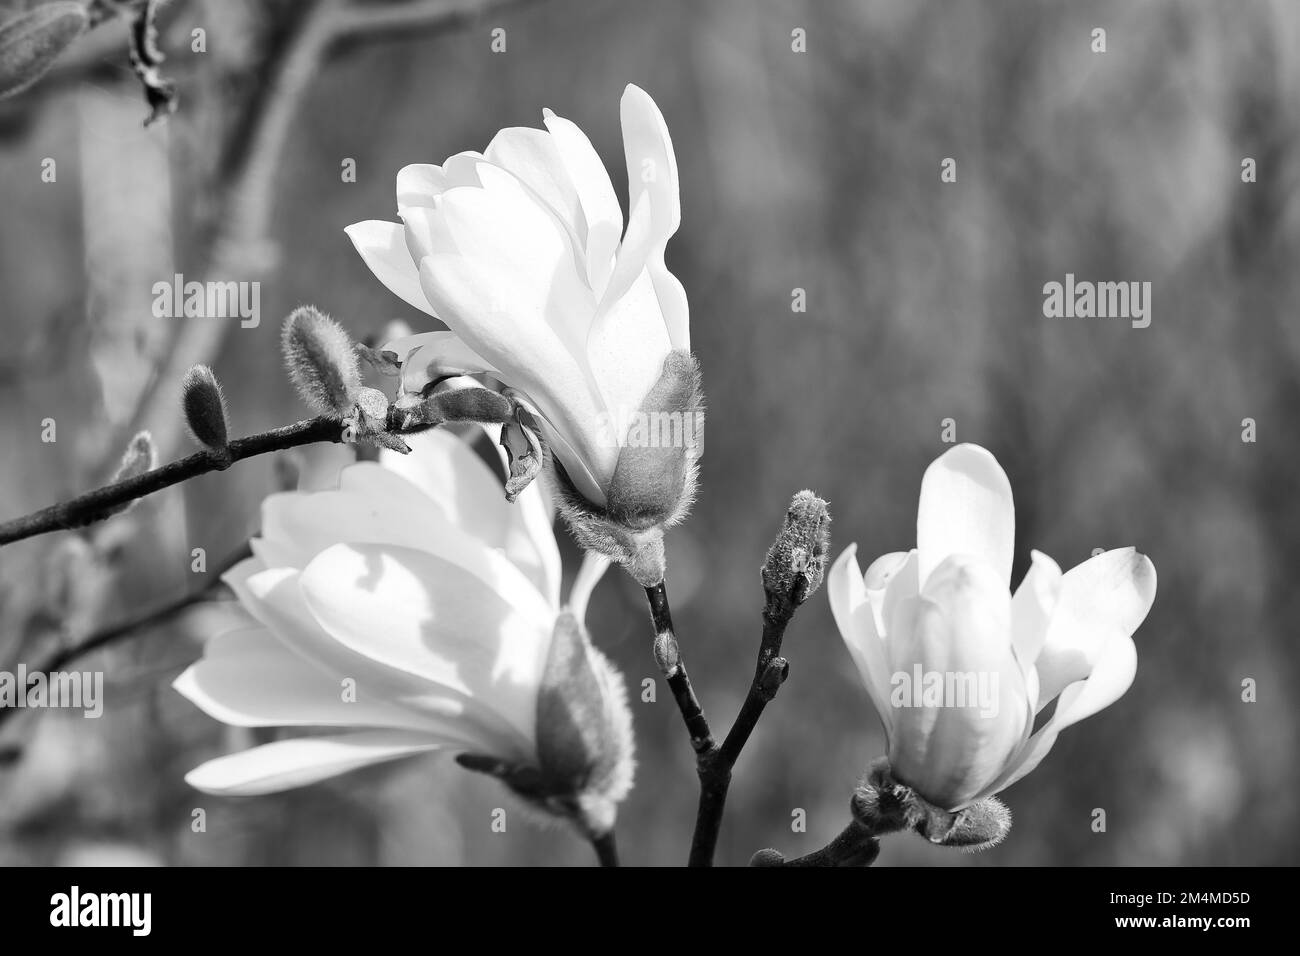 Magnolia blossom on a magnolia tree taken in black and white. Magnolia trees are a true splendor in the flowering season. An eye catcher in the landsc Stock Photo